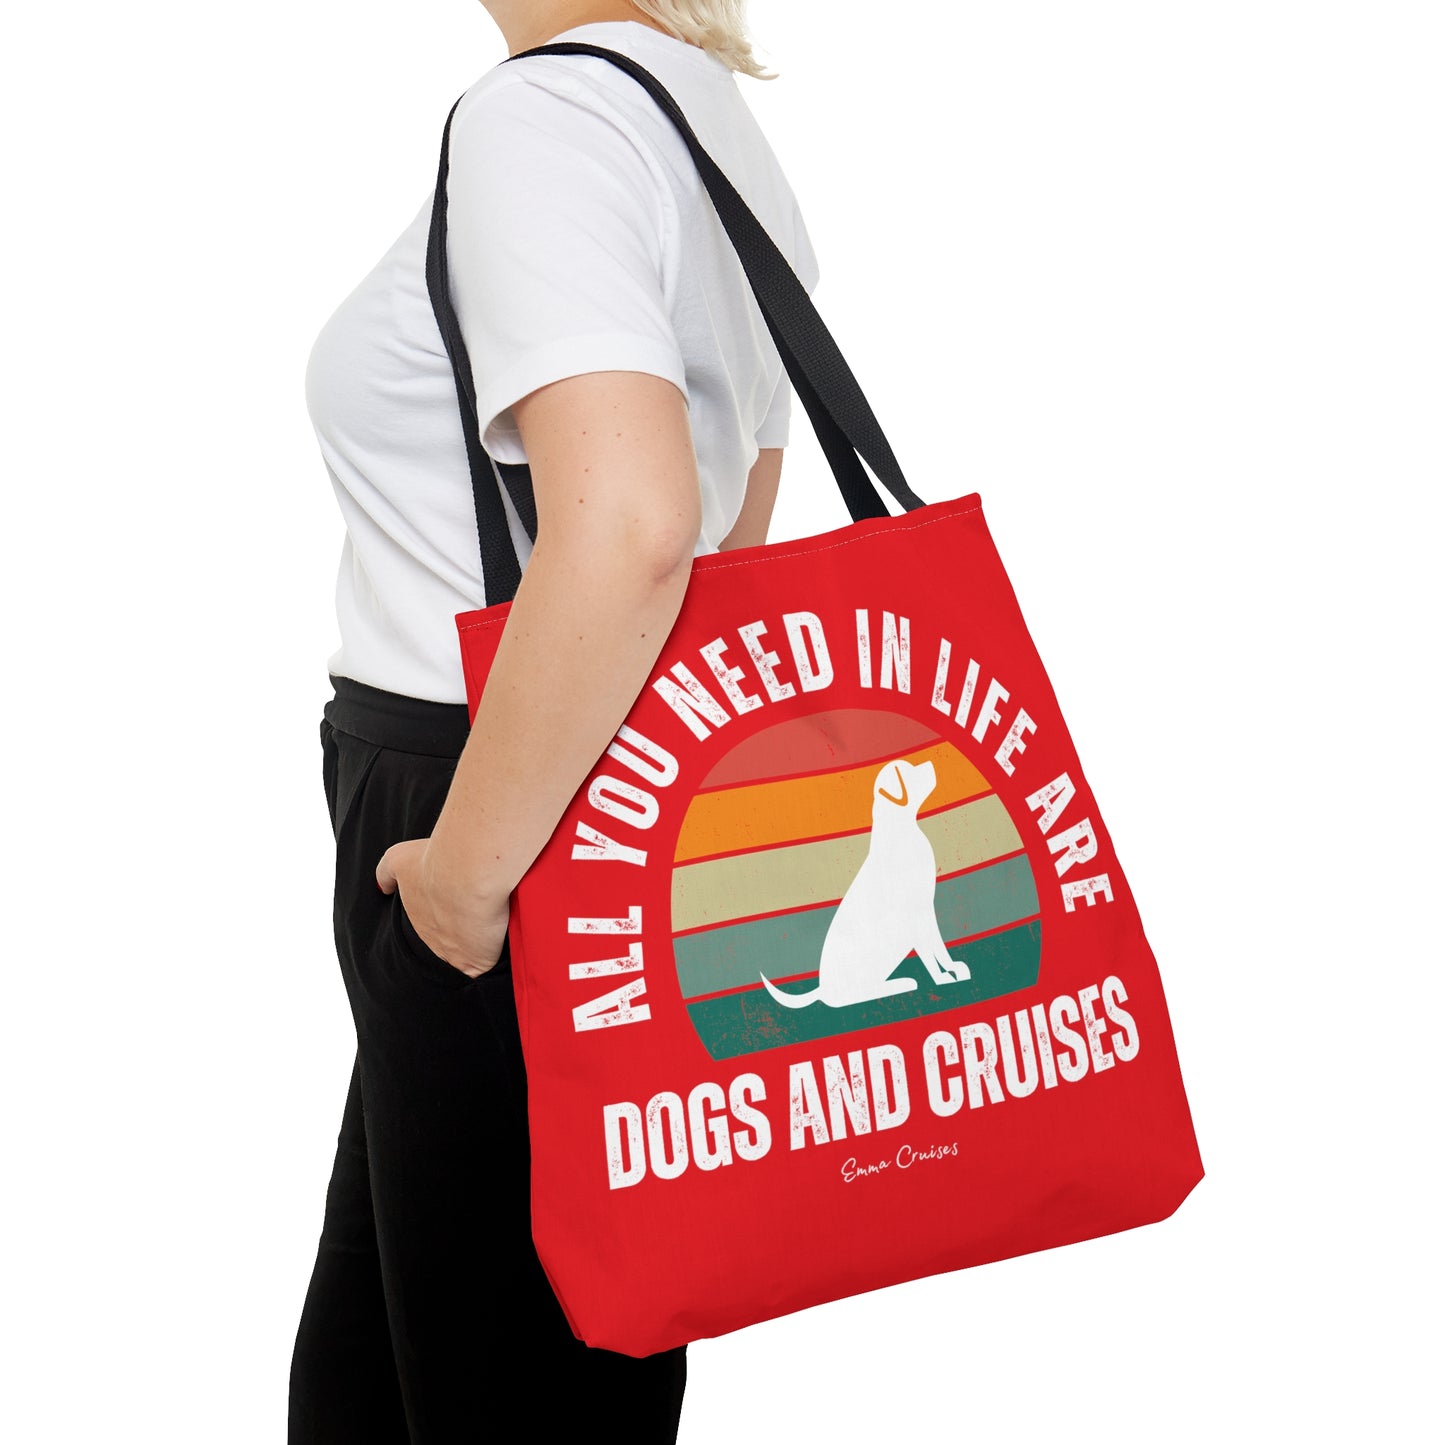 Dogs and Cruises - Bag